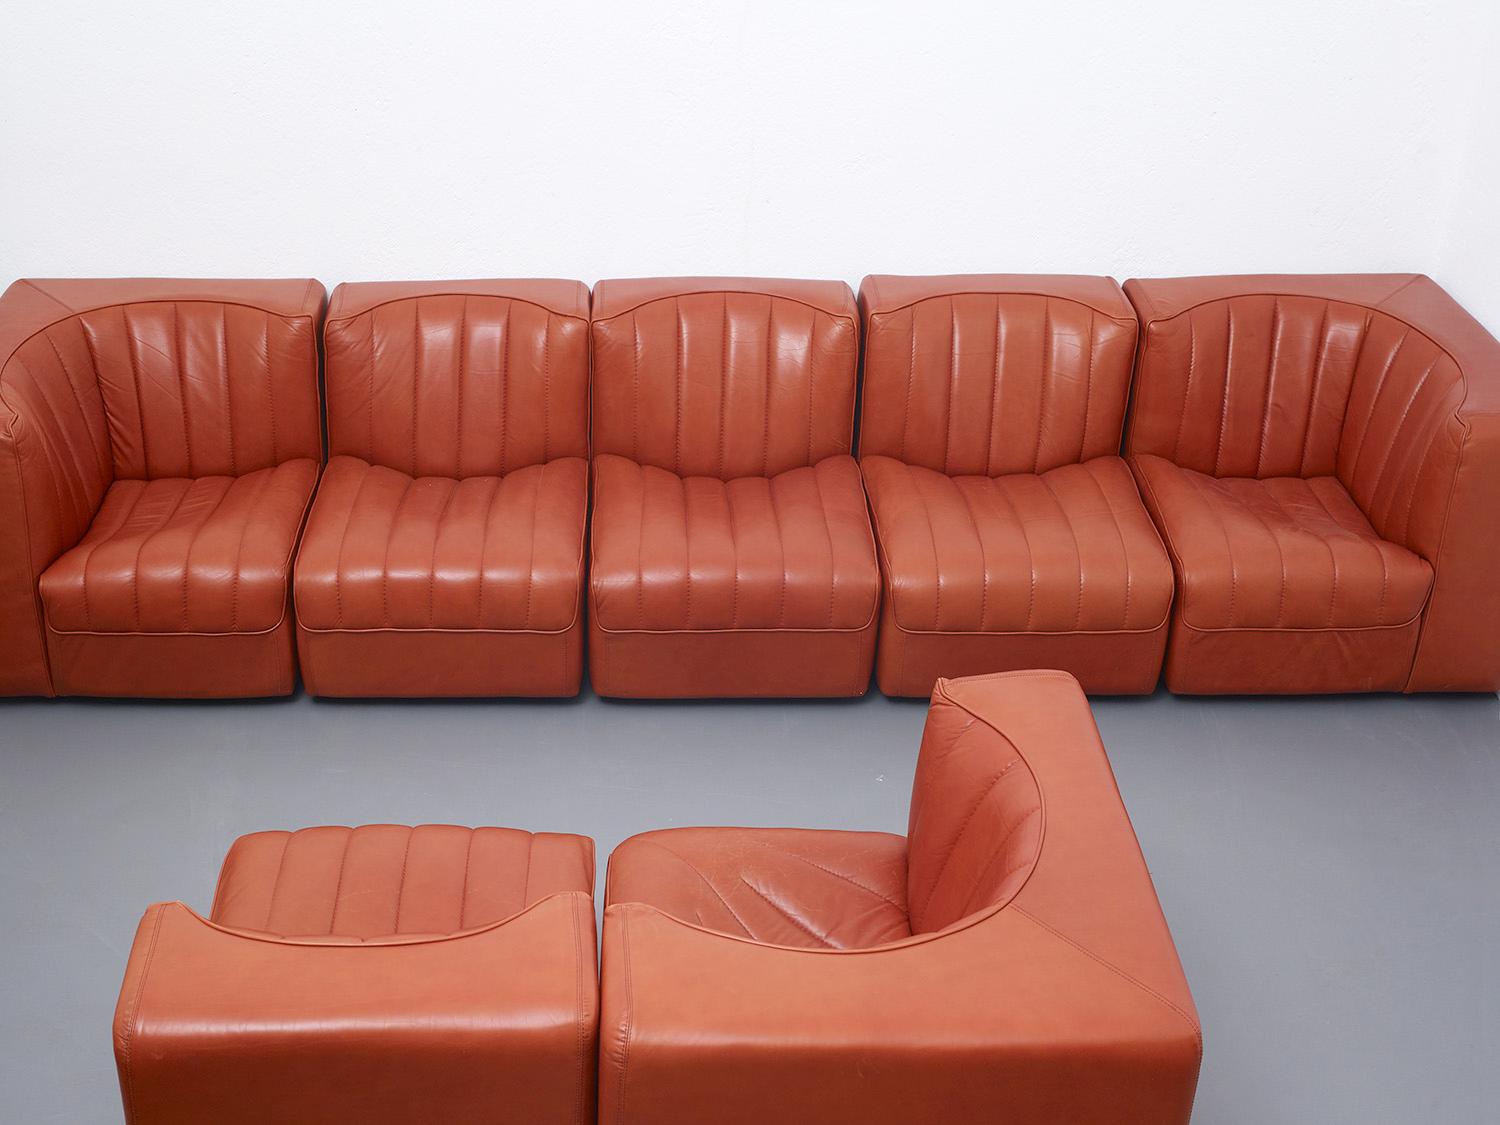 Large modular sofa from the Novemila (9000) series by Tito Agnoli for Arflex, Italy, 1969.


This large sofa, the elements of which are modular at will, is composed of 7 elements including two angles, a connection and four single elements which